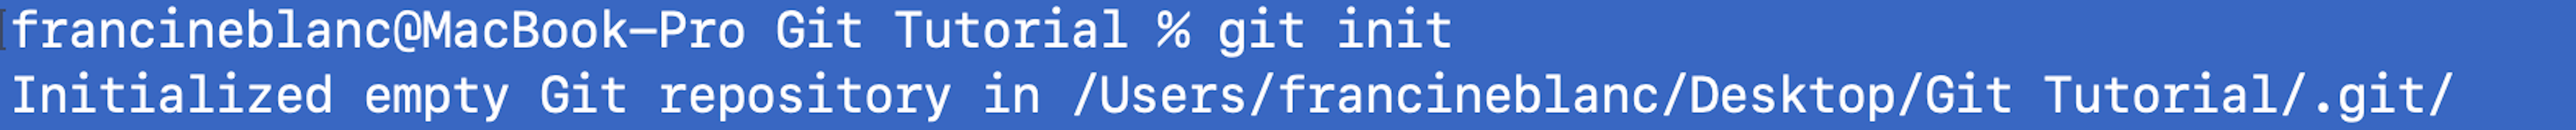 Image of git init command being run